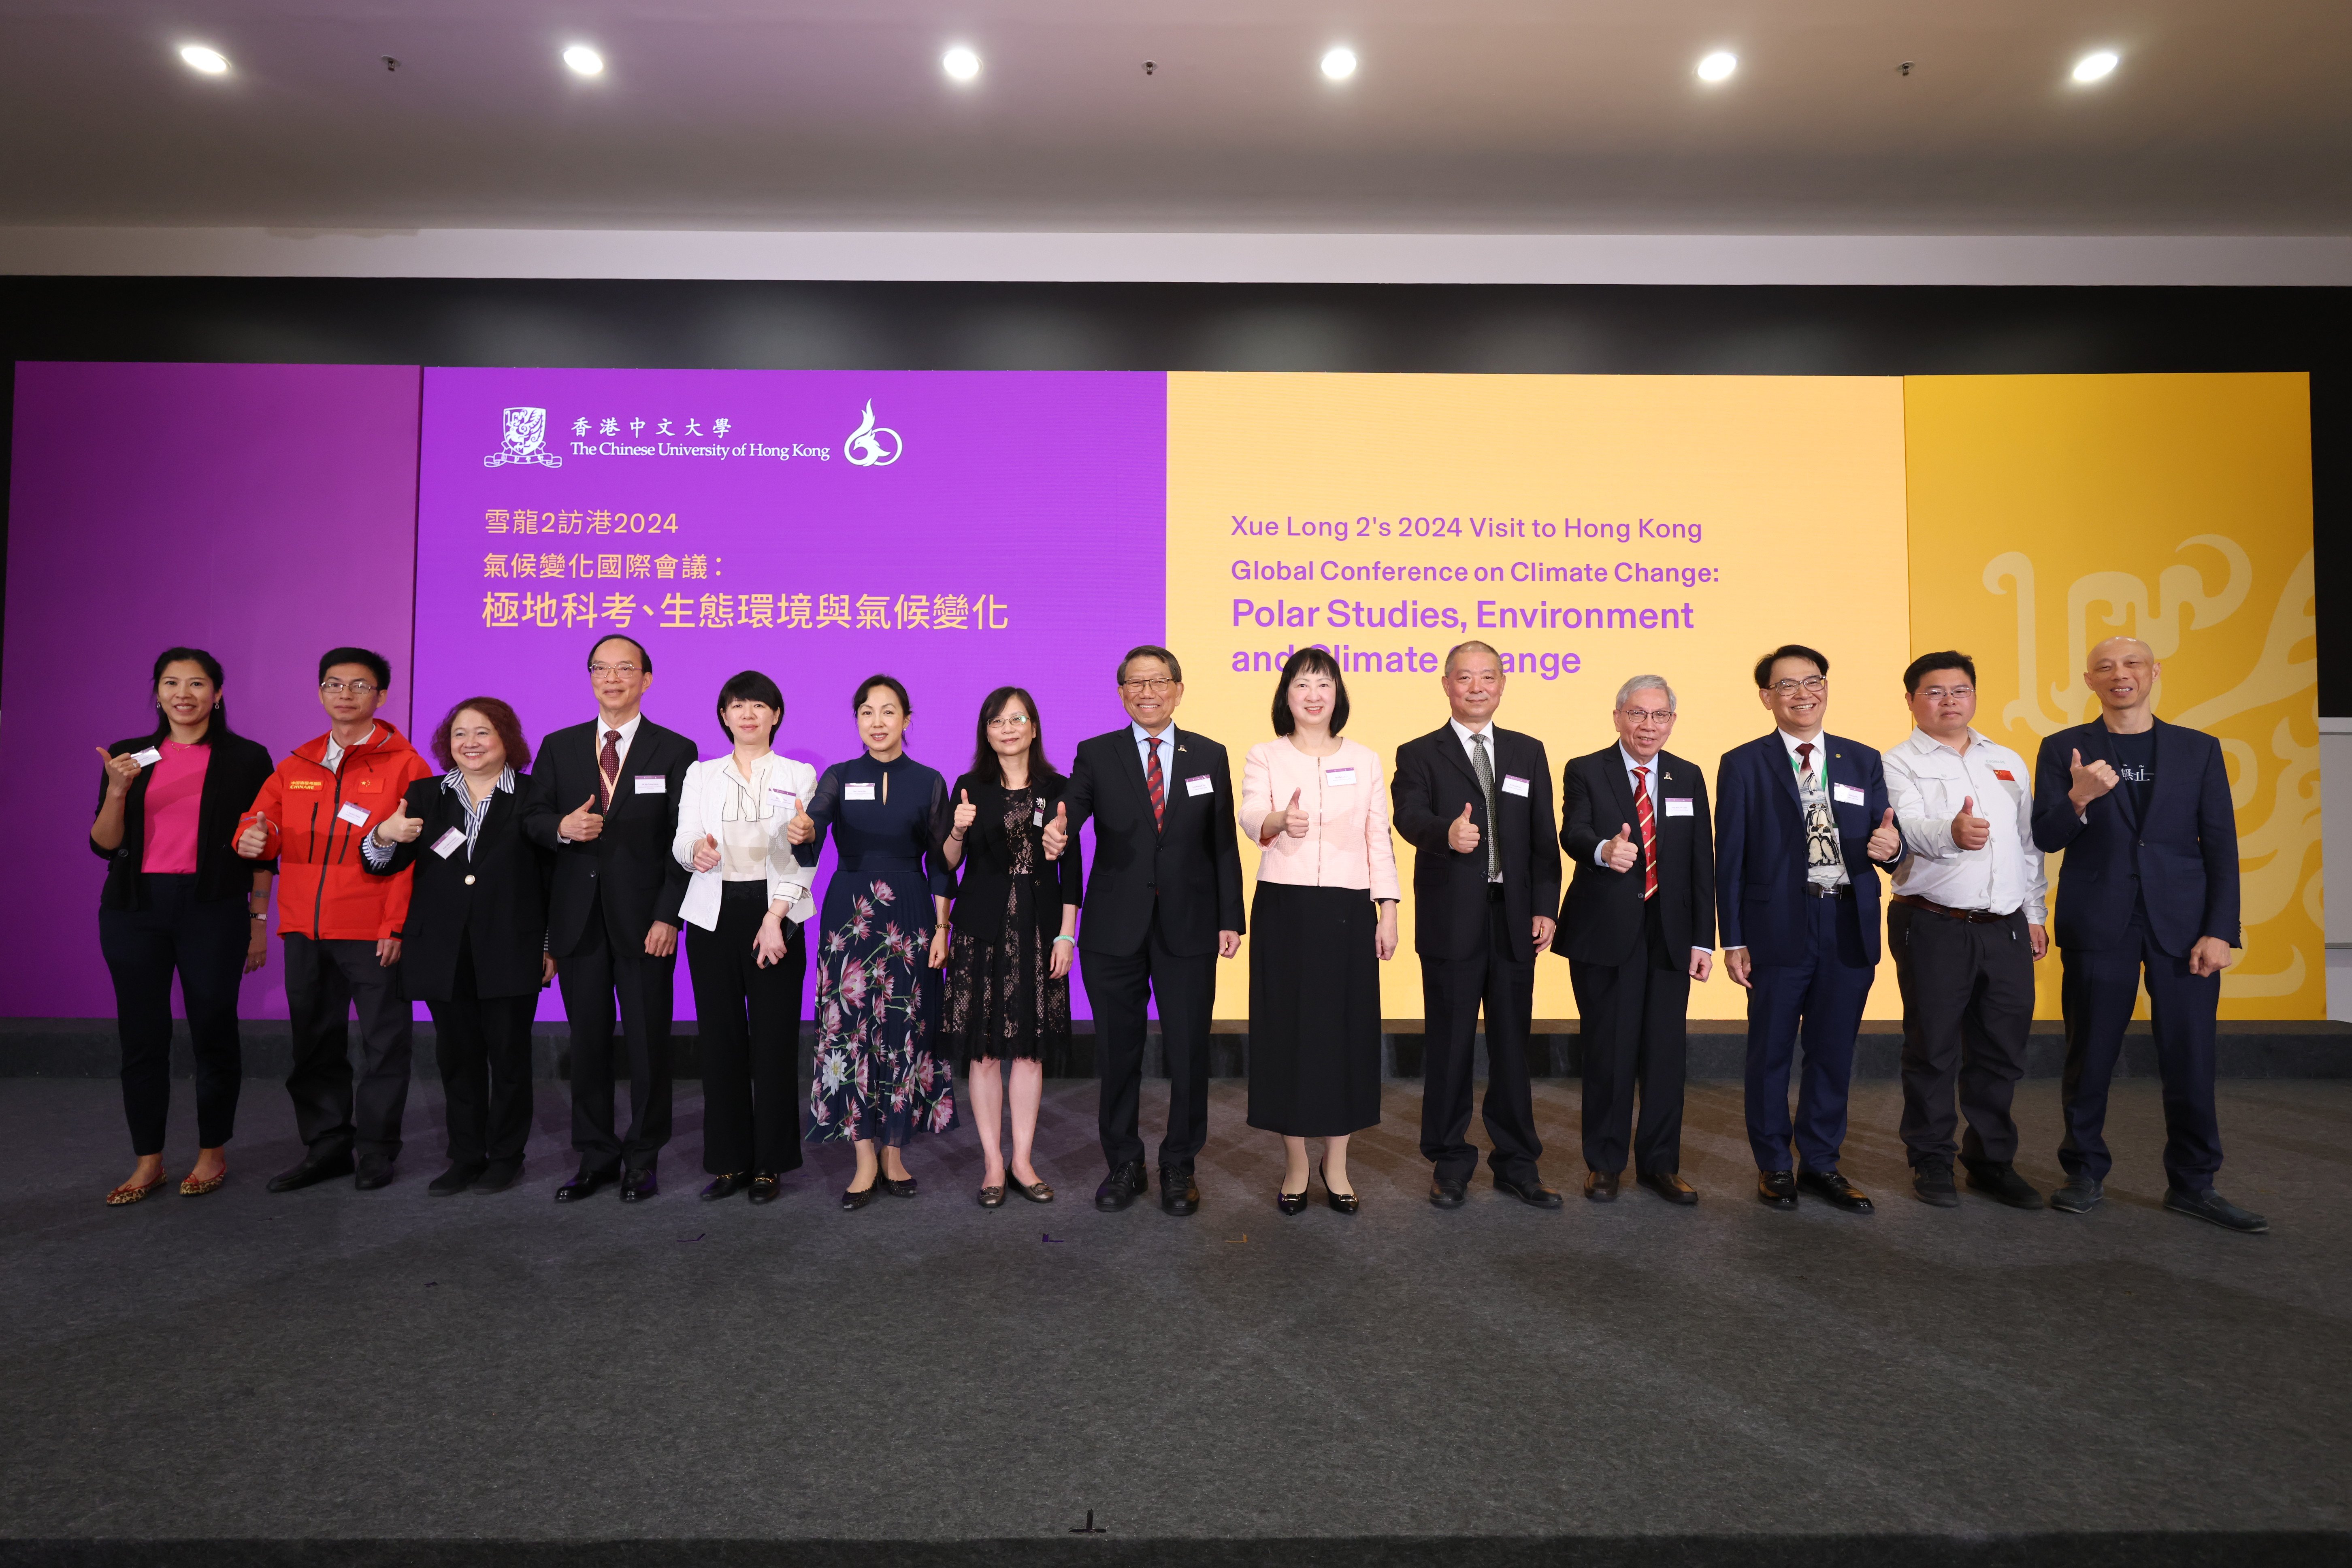 CUHK organised the “Global Conference on Climate Change: Polar Studies, Environment and Climate Change”. 